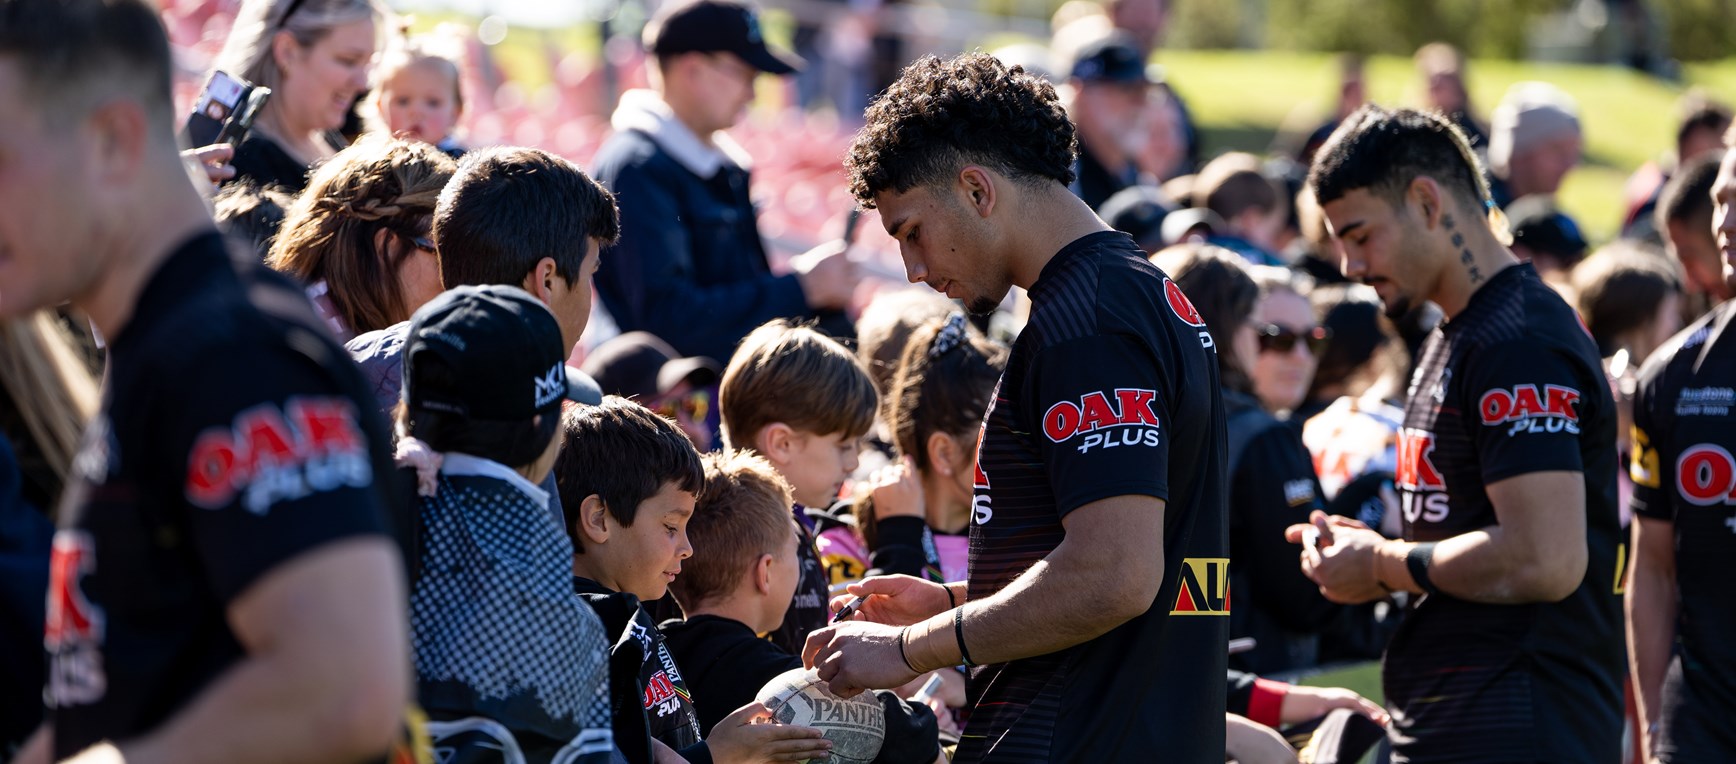 Gallery: Members Open Training Day